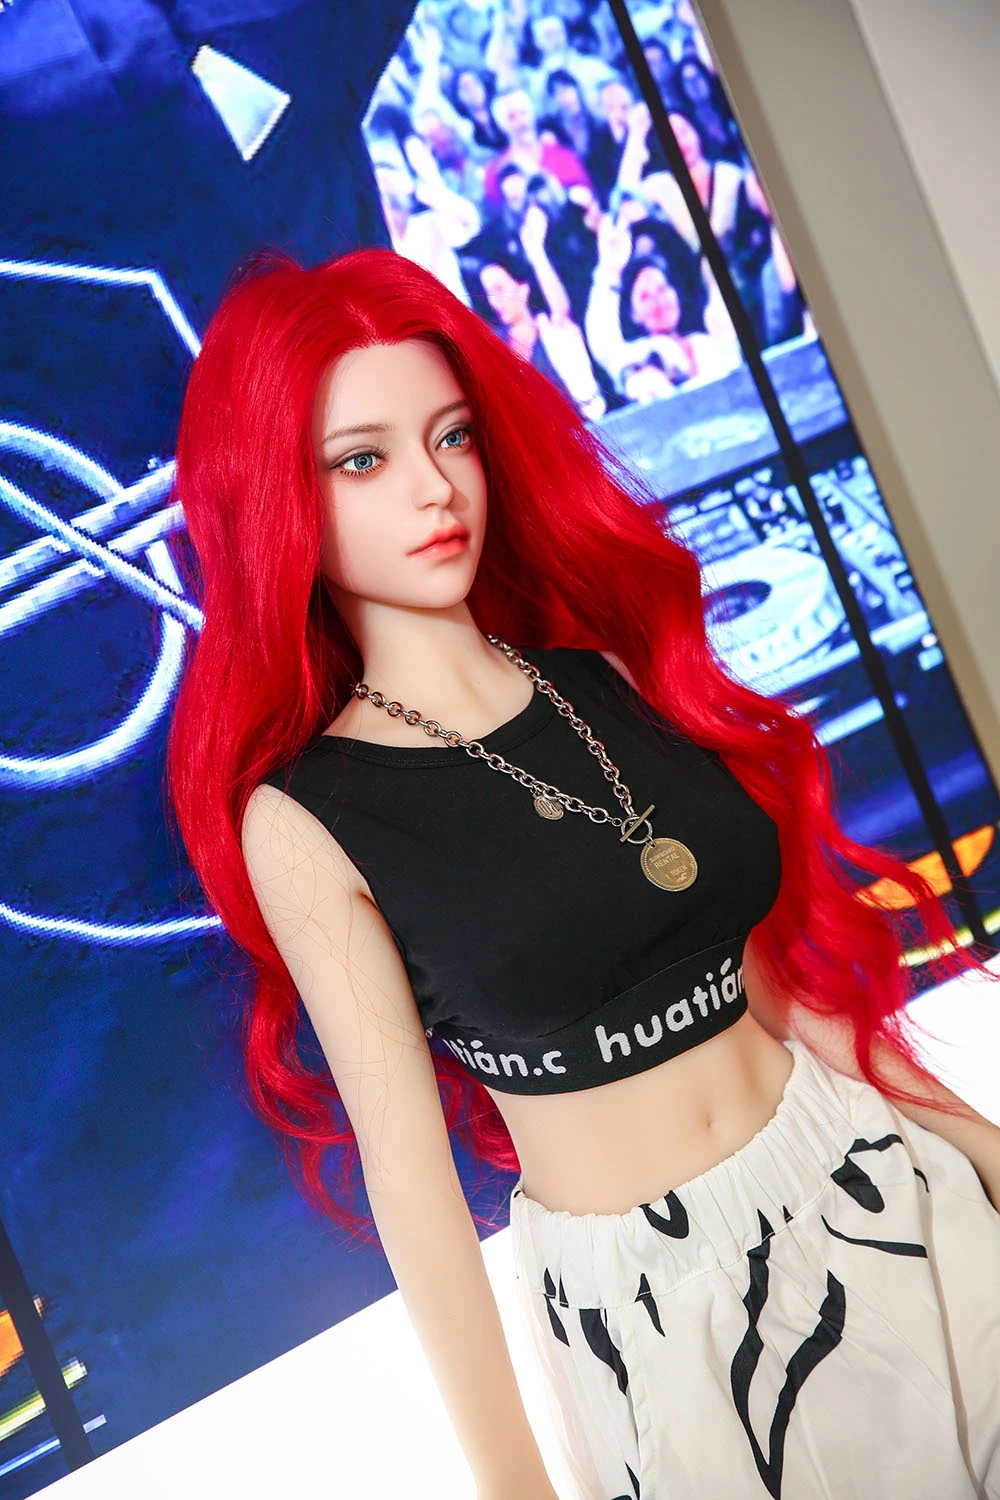 Hot Red Hair Sex Doll